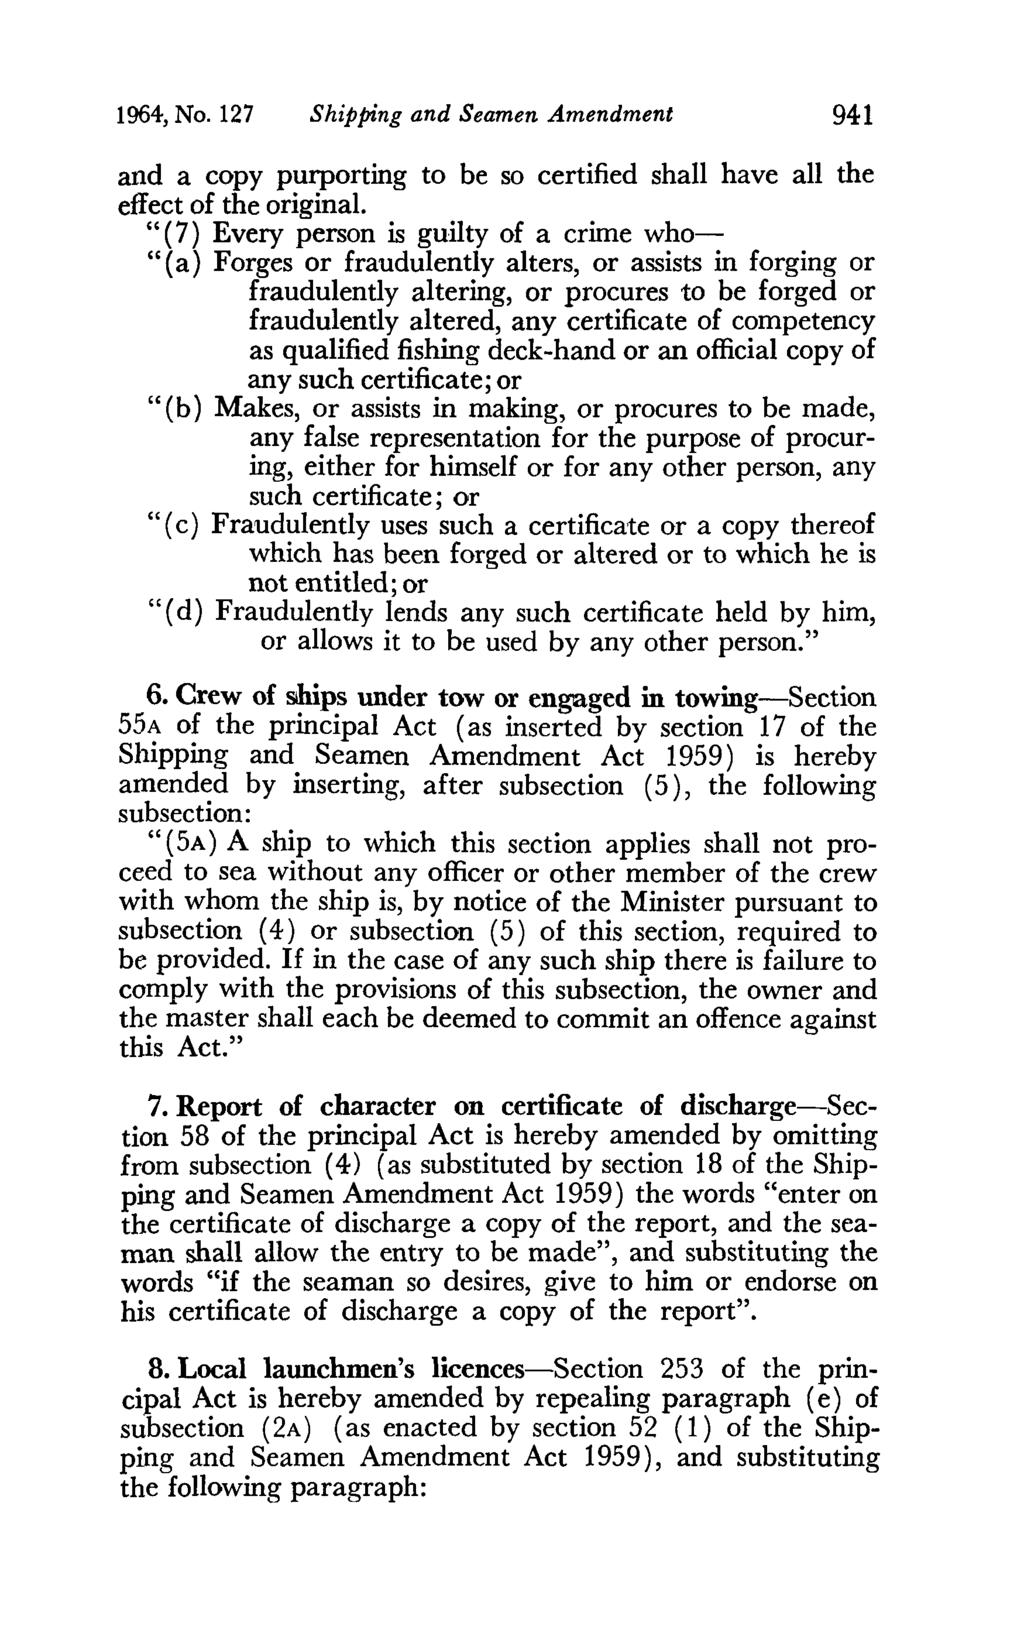 1964, No. 127 Shipping and Seamen Amendment 941 and a copy puiporting to be so certified shall have all the effect of the original.